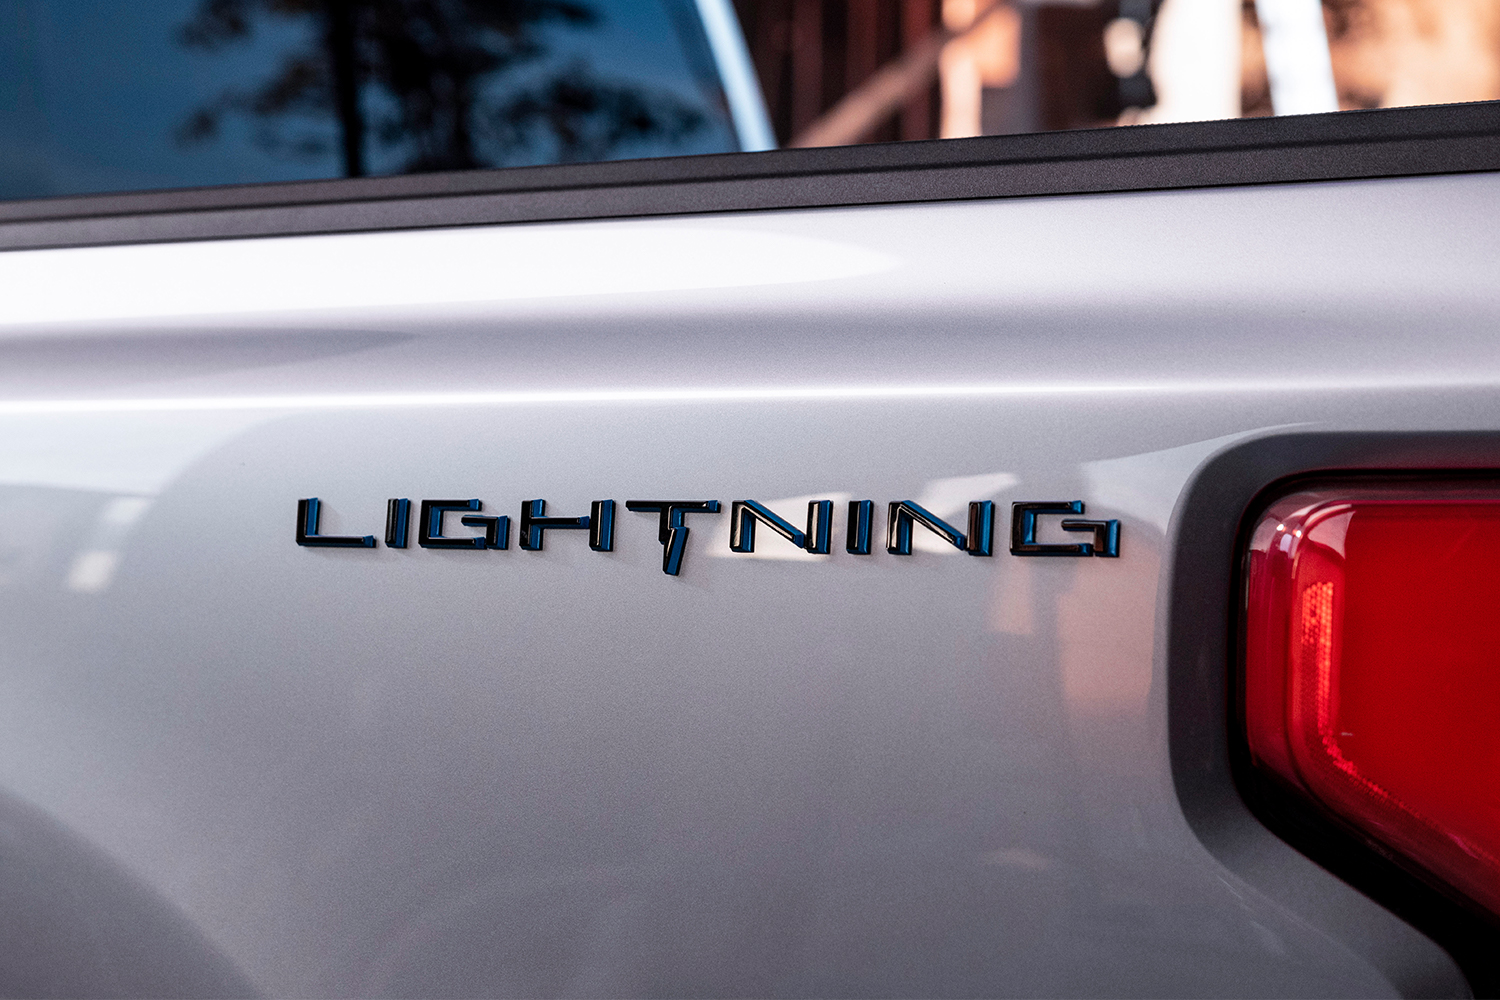 The word Lightning on the side of Ford's new electric F-150 pickup truck